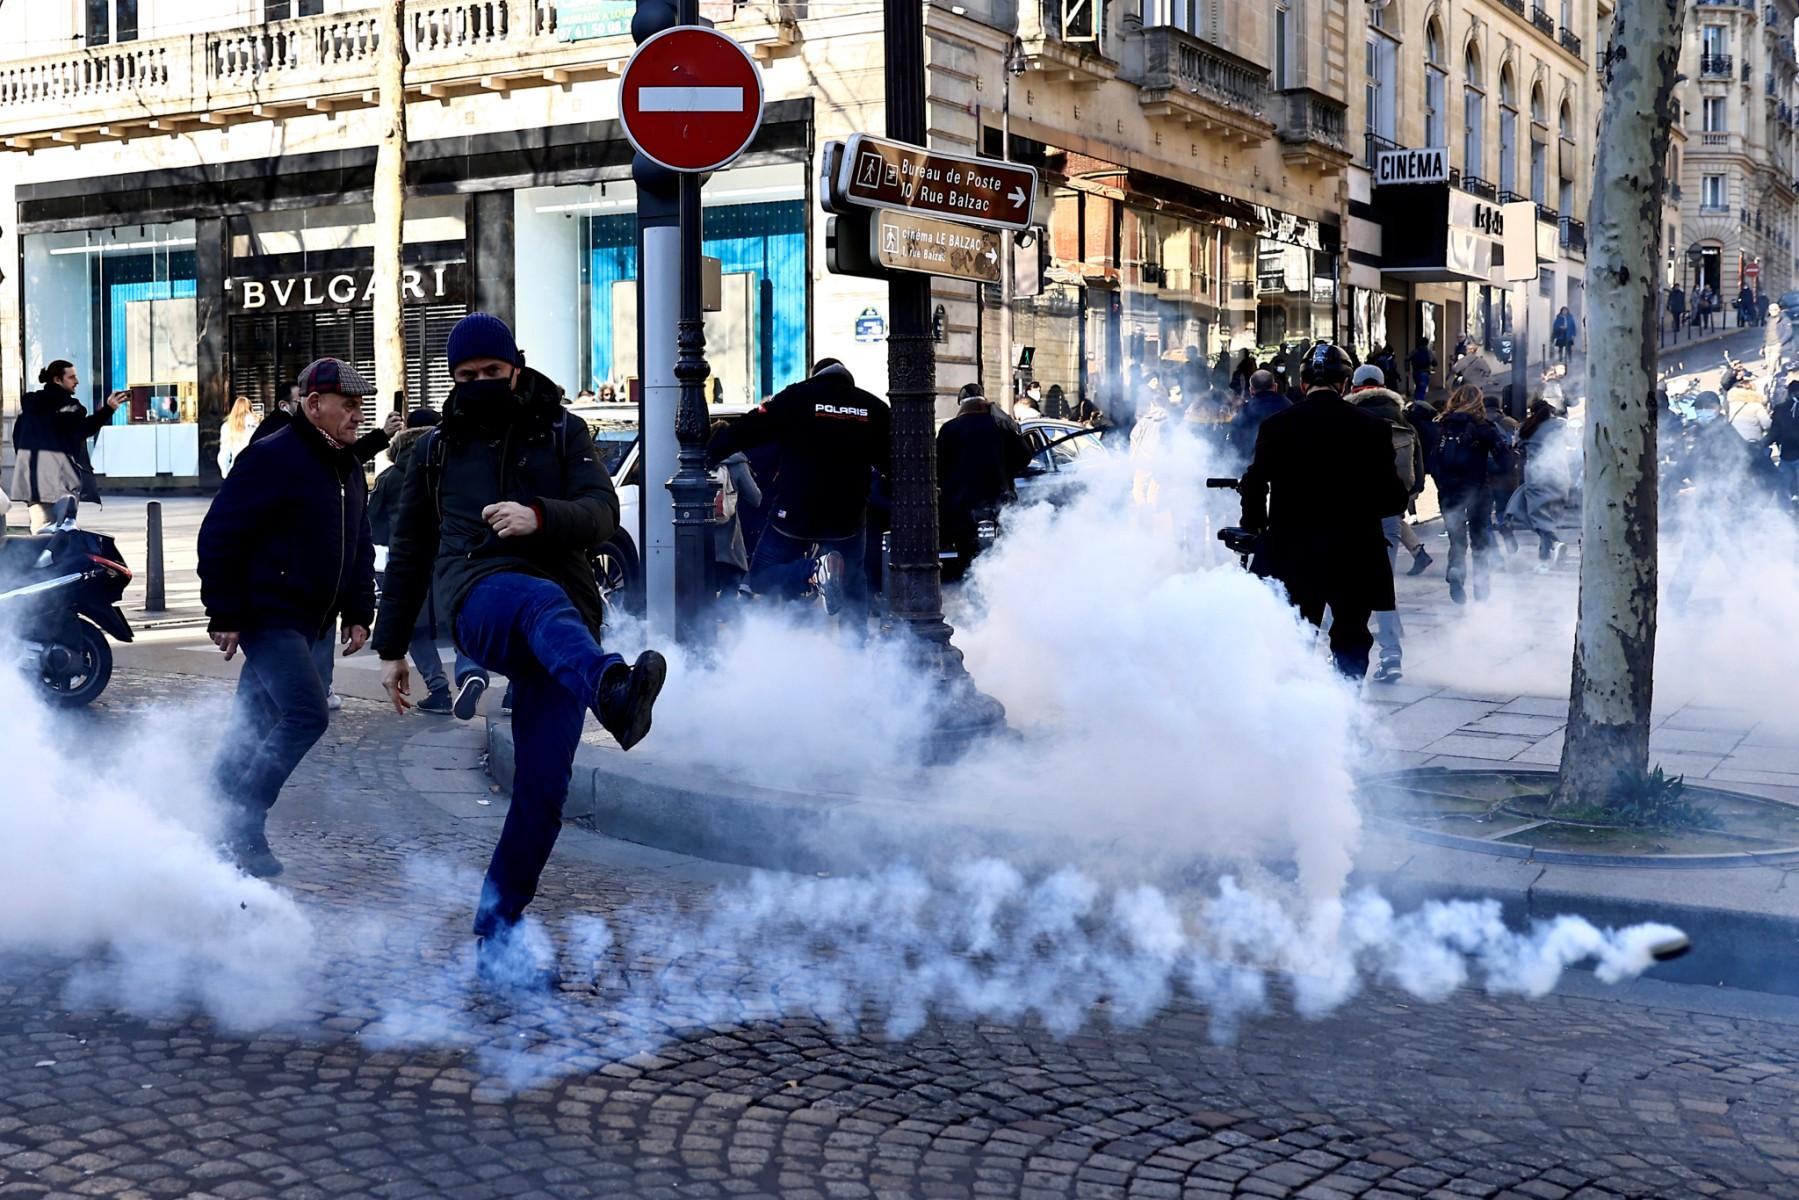 A man kicks a tear gas canister fired by French anti-riot policemen on the Champs Elysees in Paris on Feb 12, as convoys of protesters arrived in the French capital. Photo: AFP